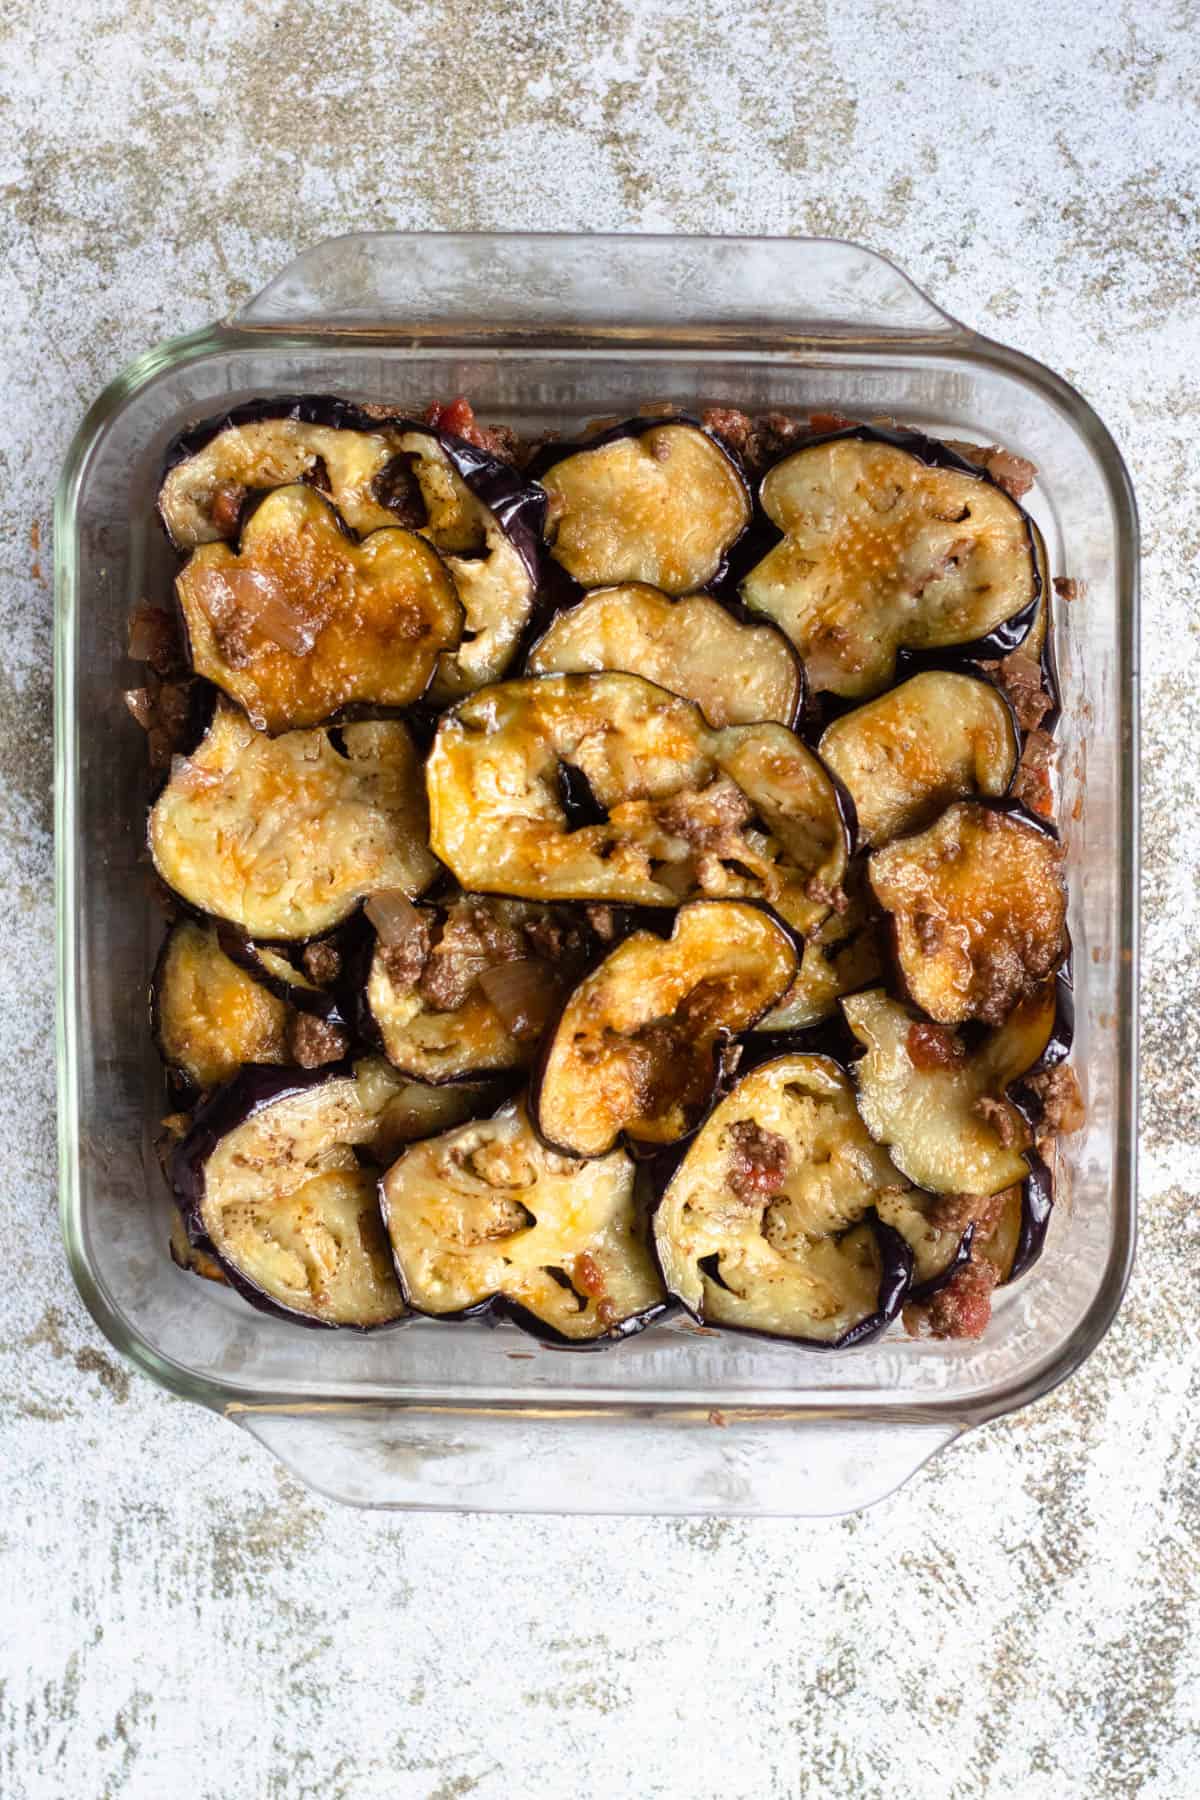 fried eggplants layered in an 8x8 casserole dish